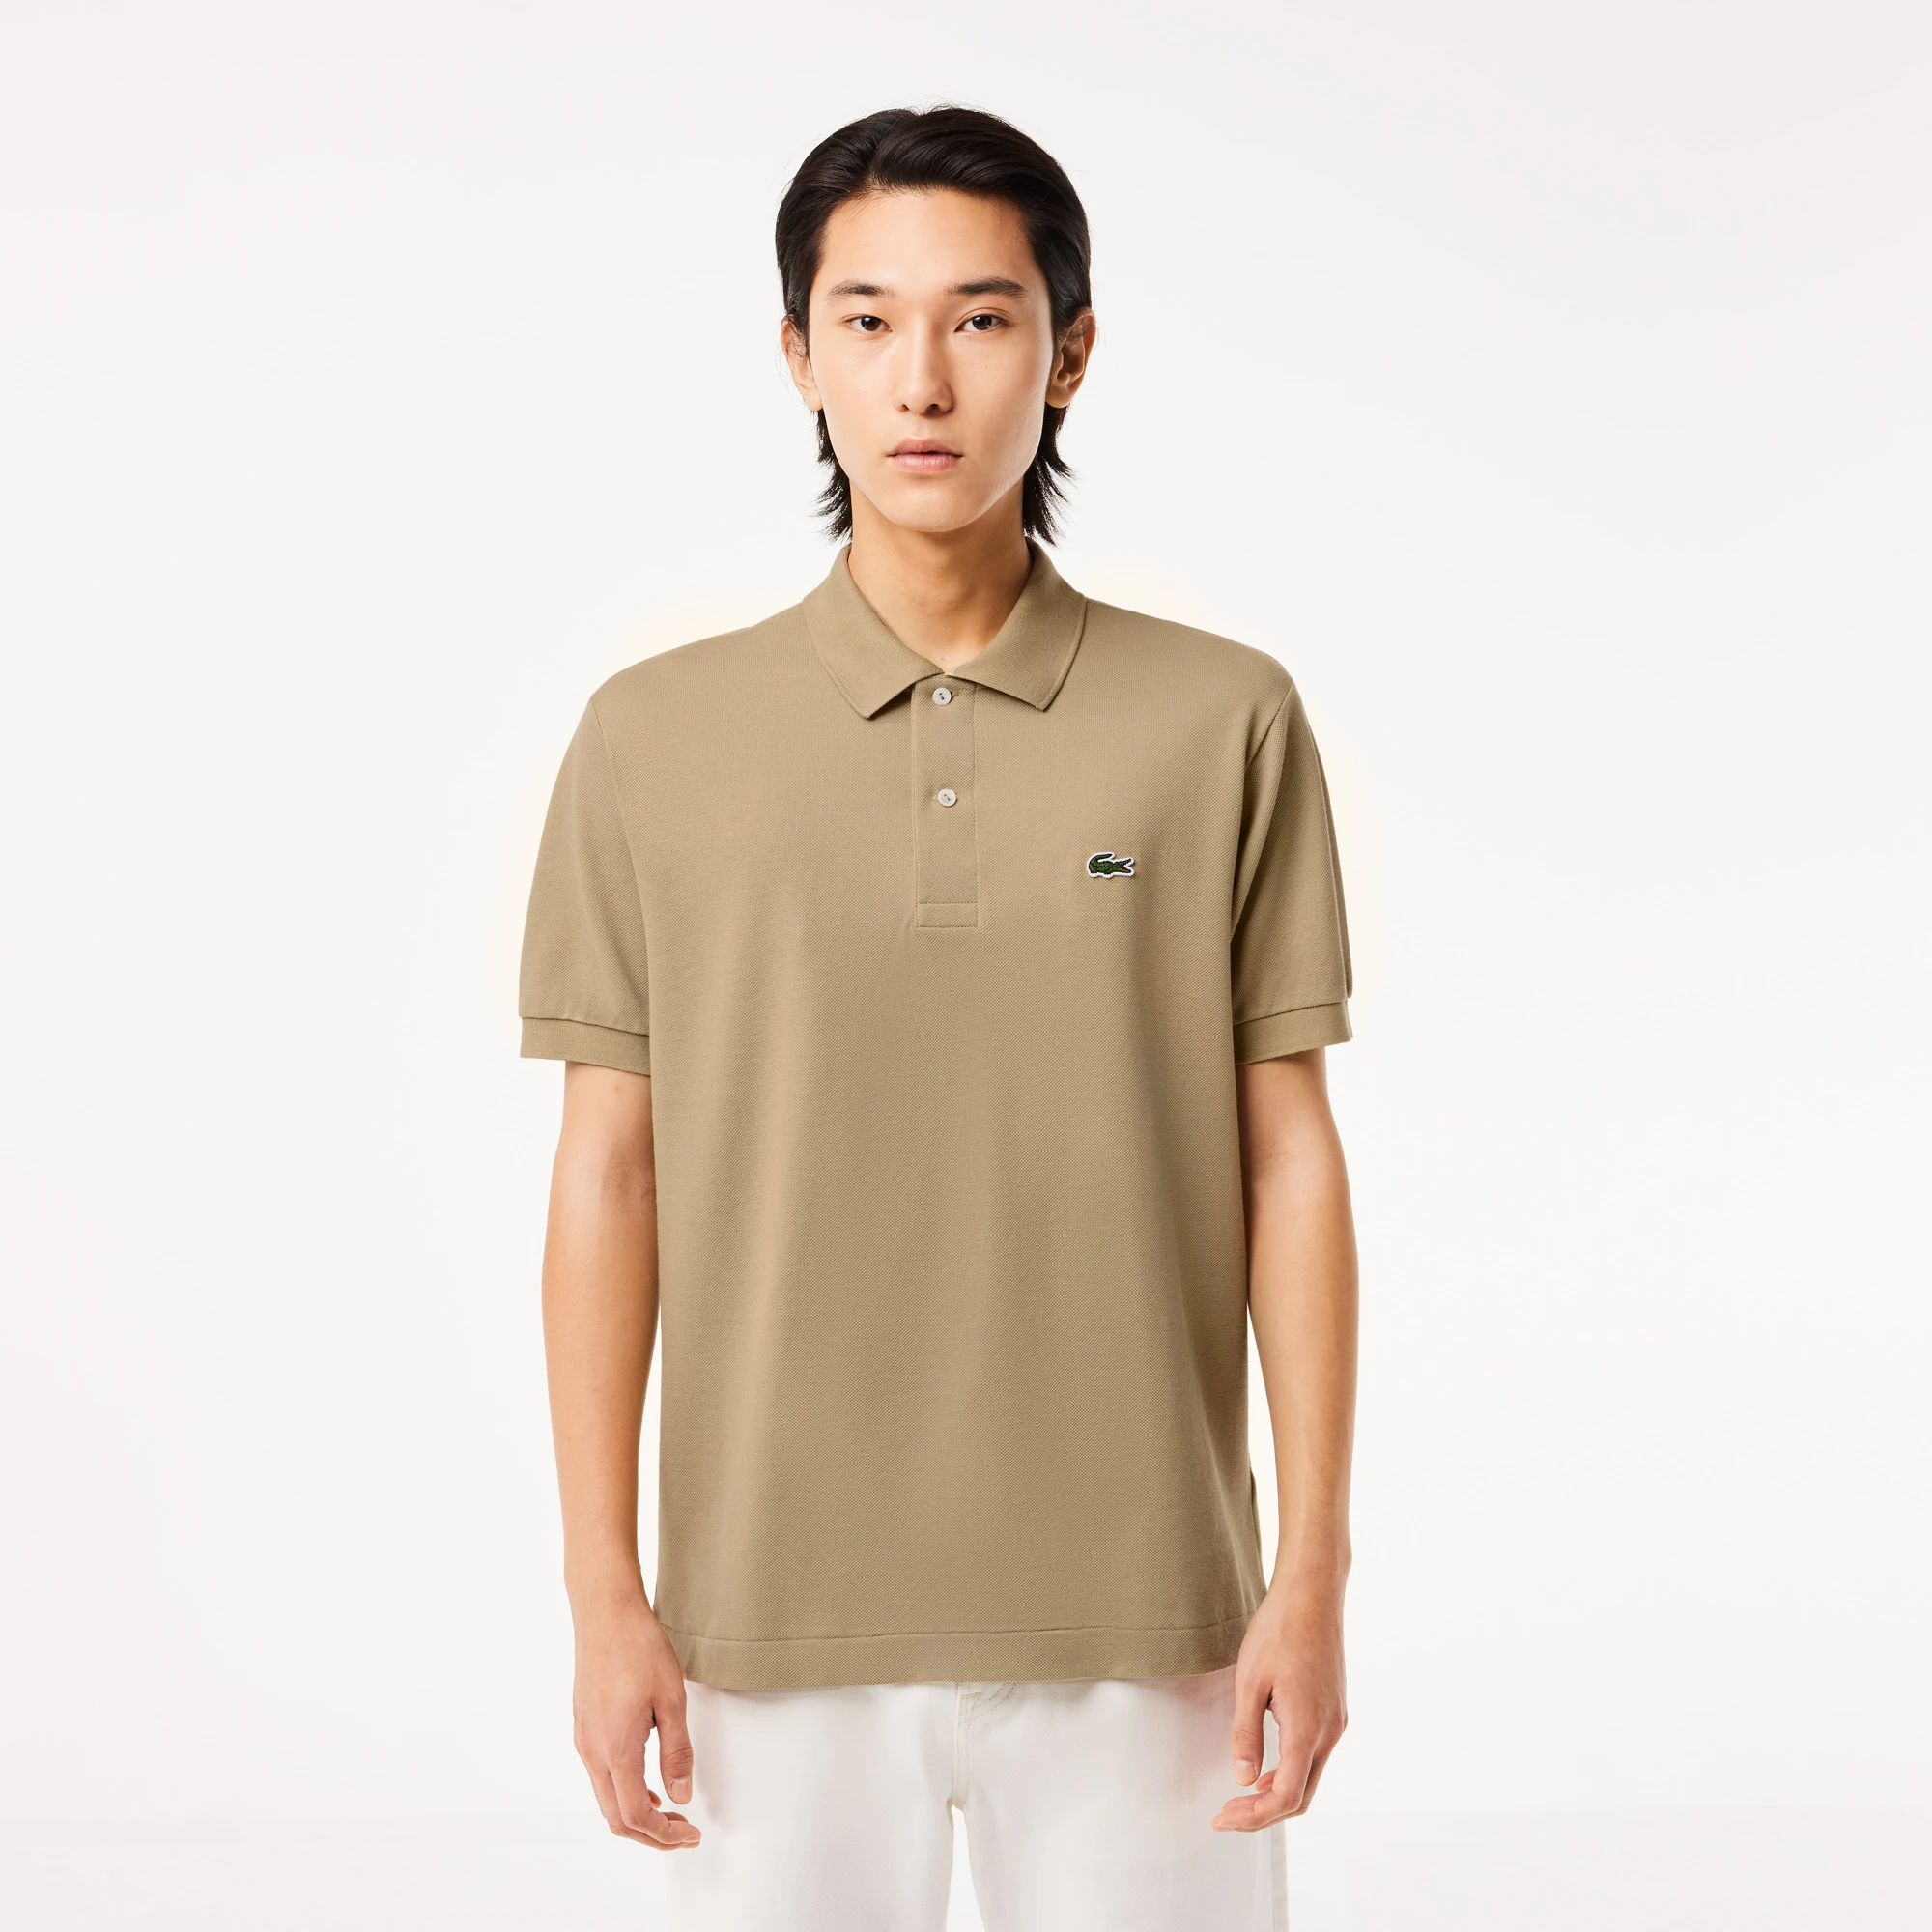 First Versions: Lacoste (polo shirts)